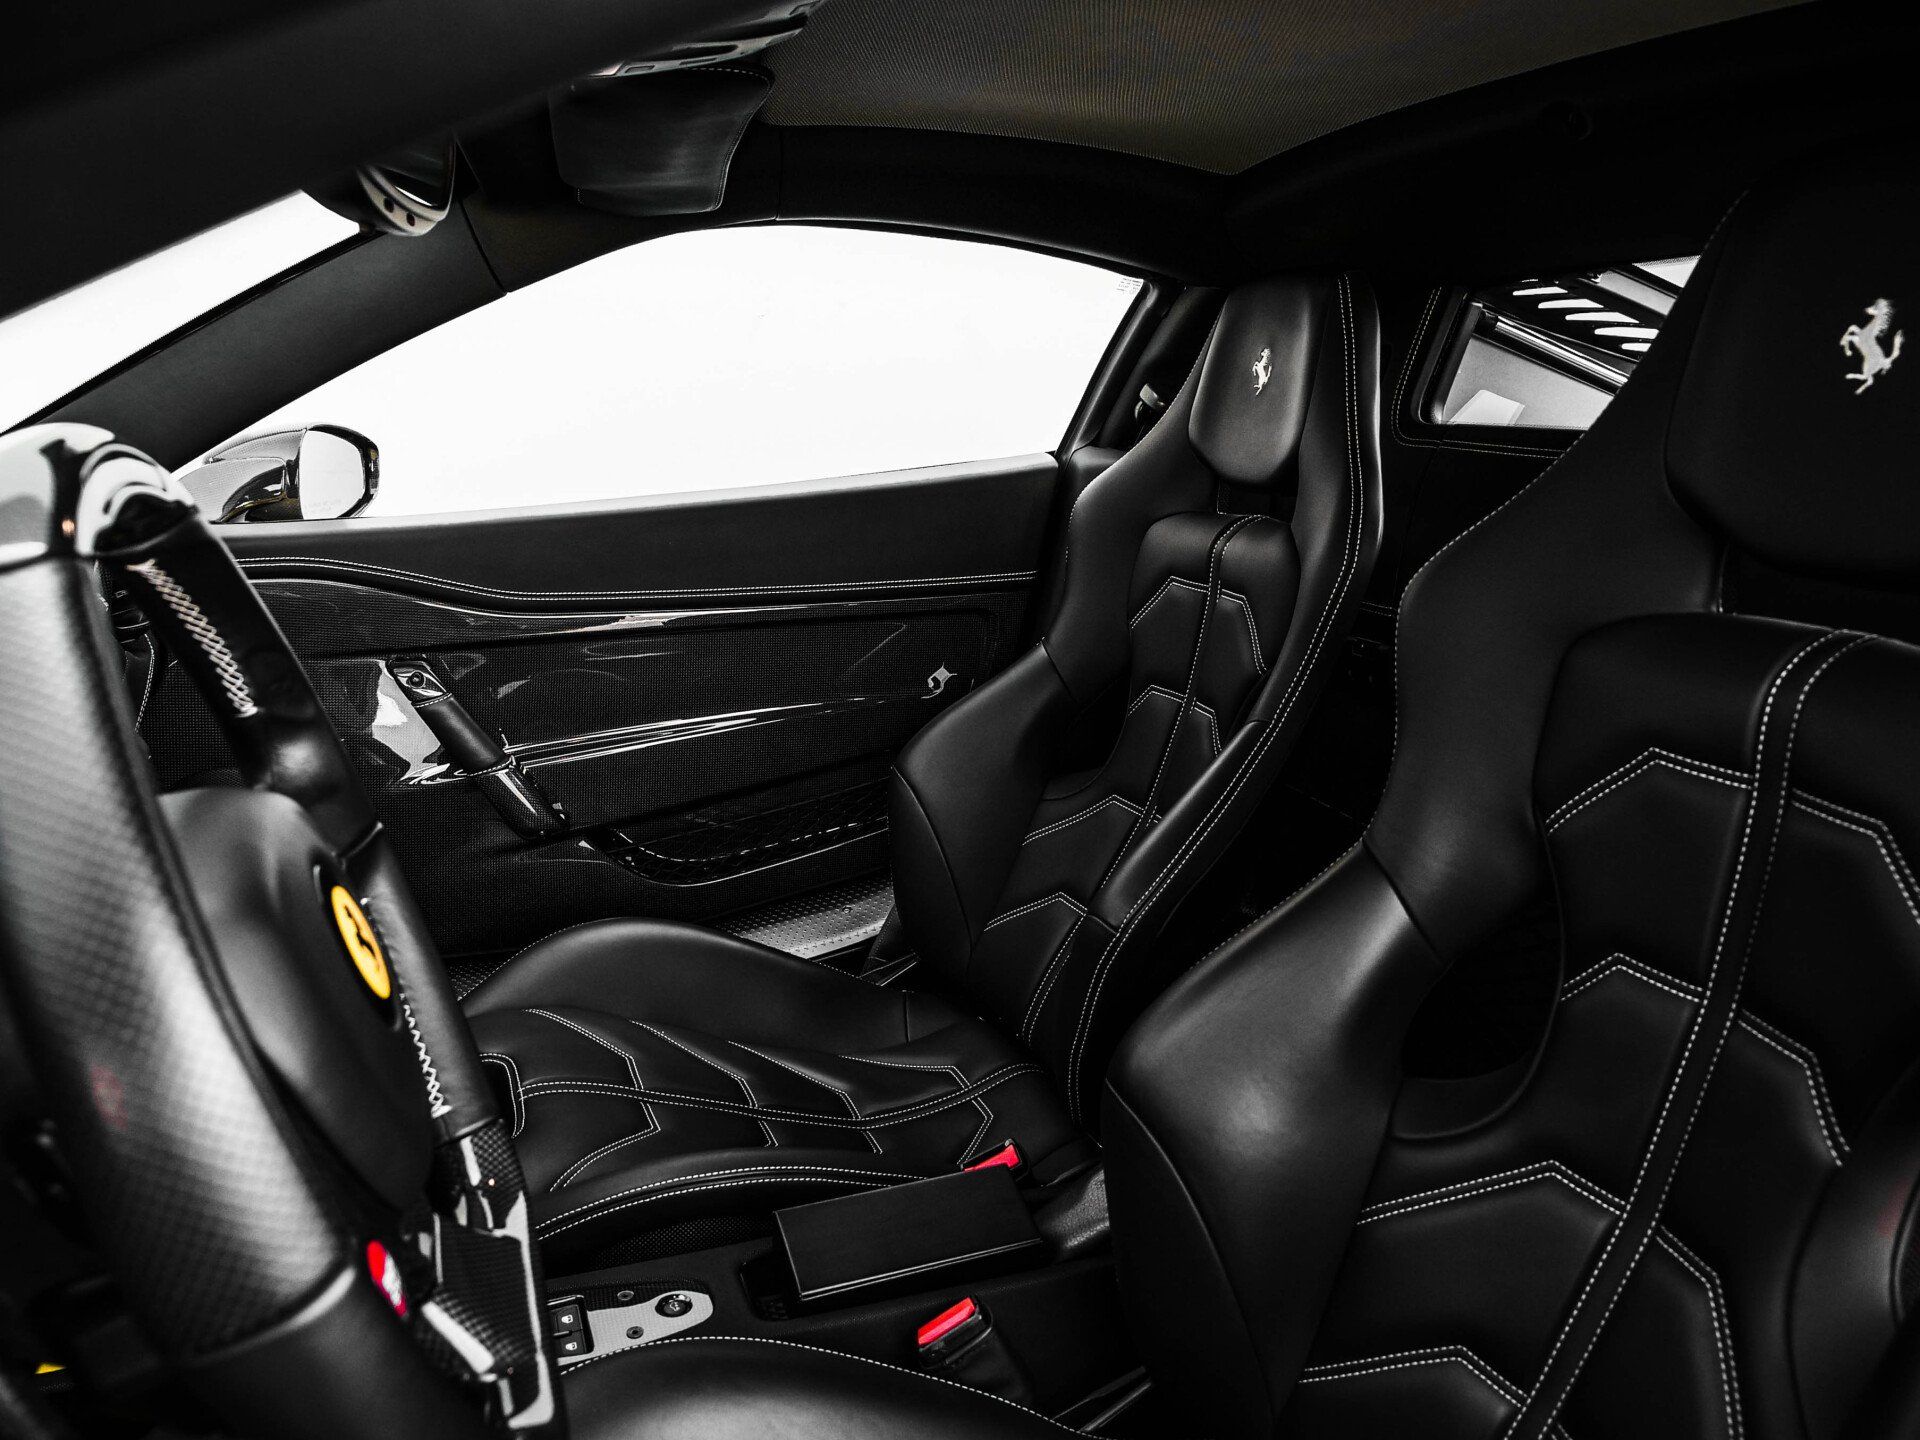 Interior view of a modern black car featuring comfortable leather seats.